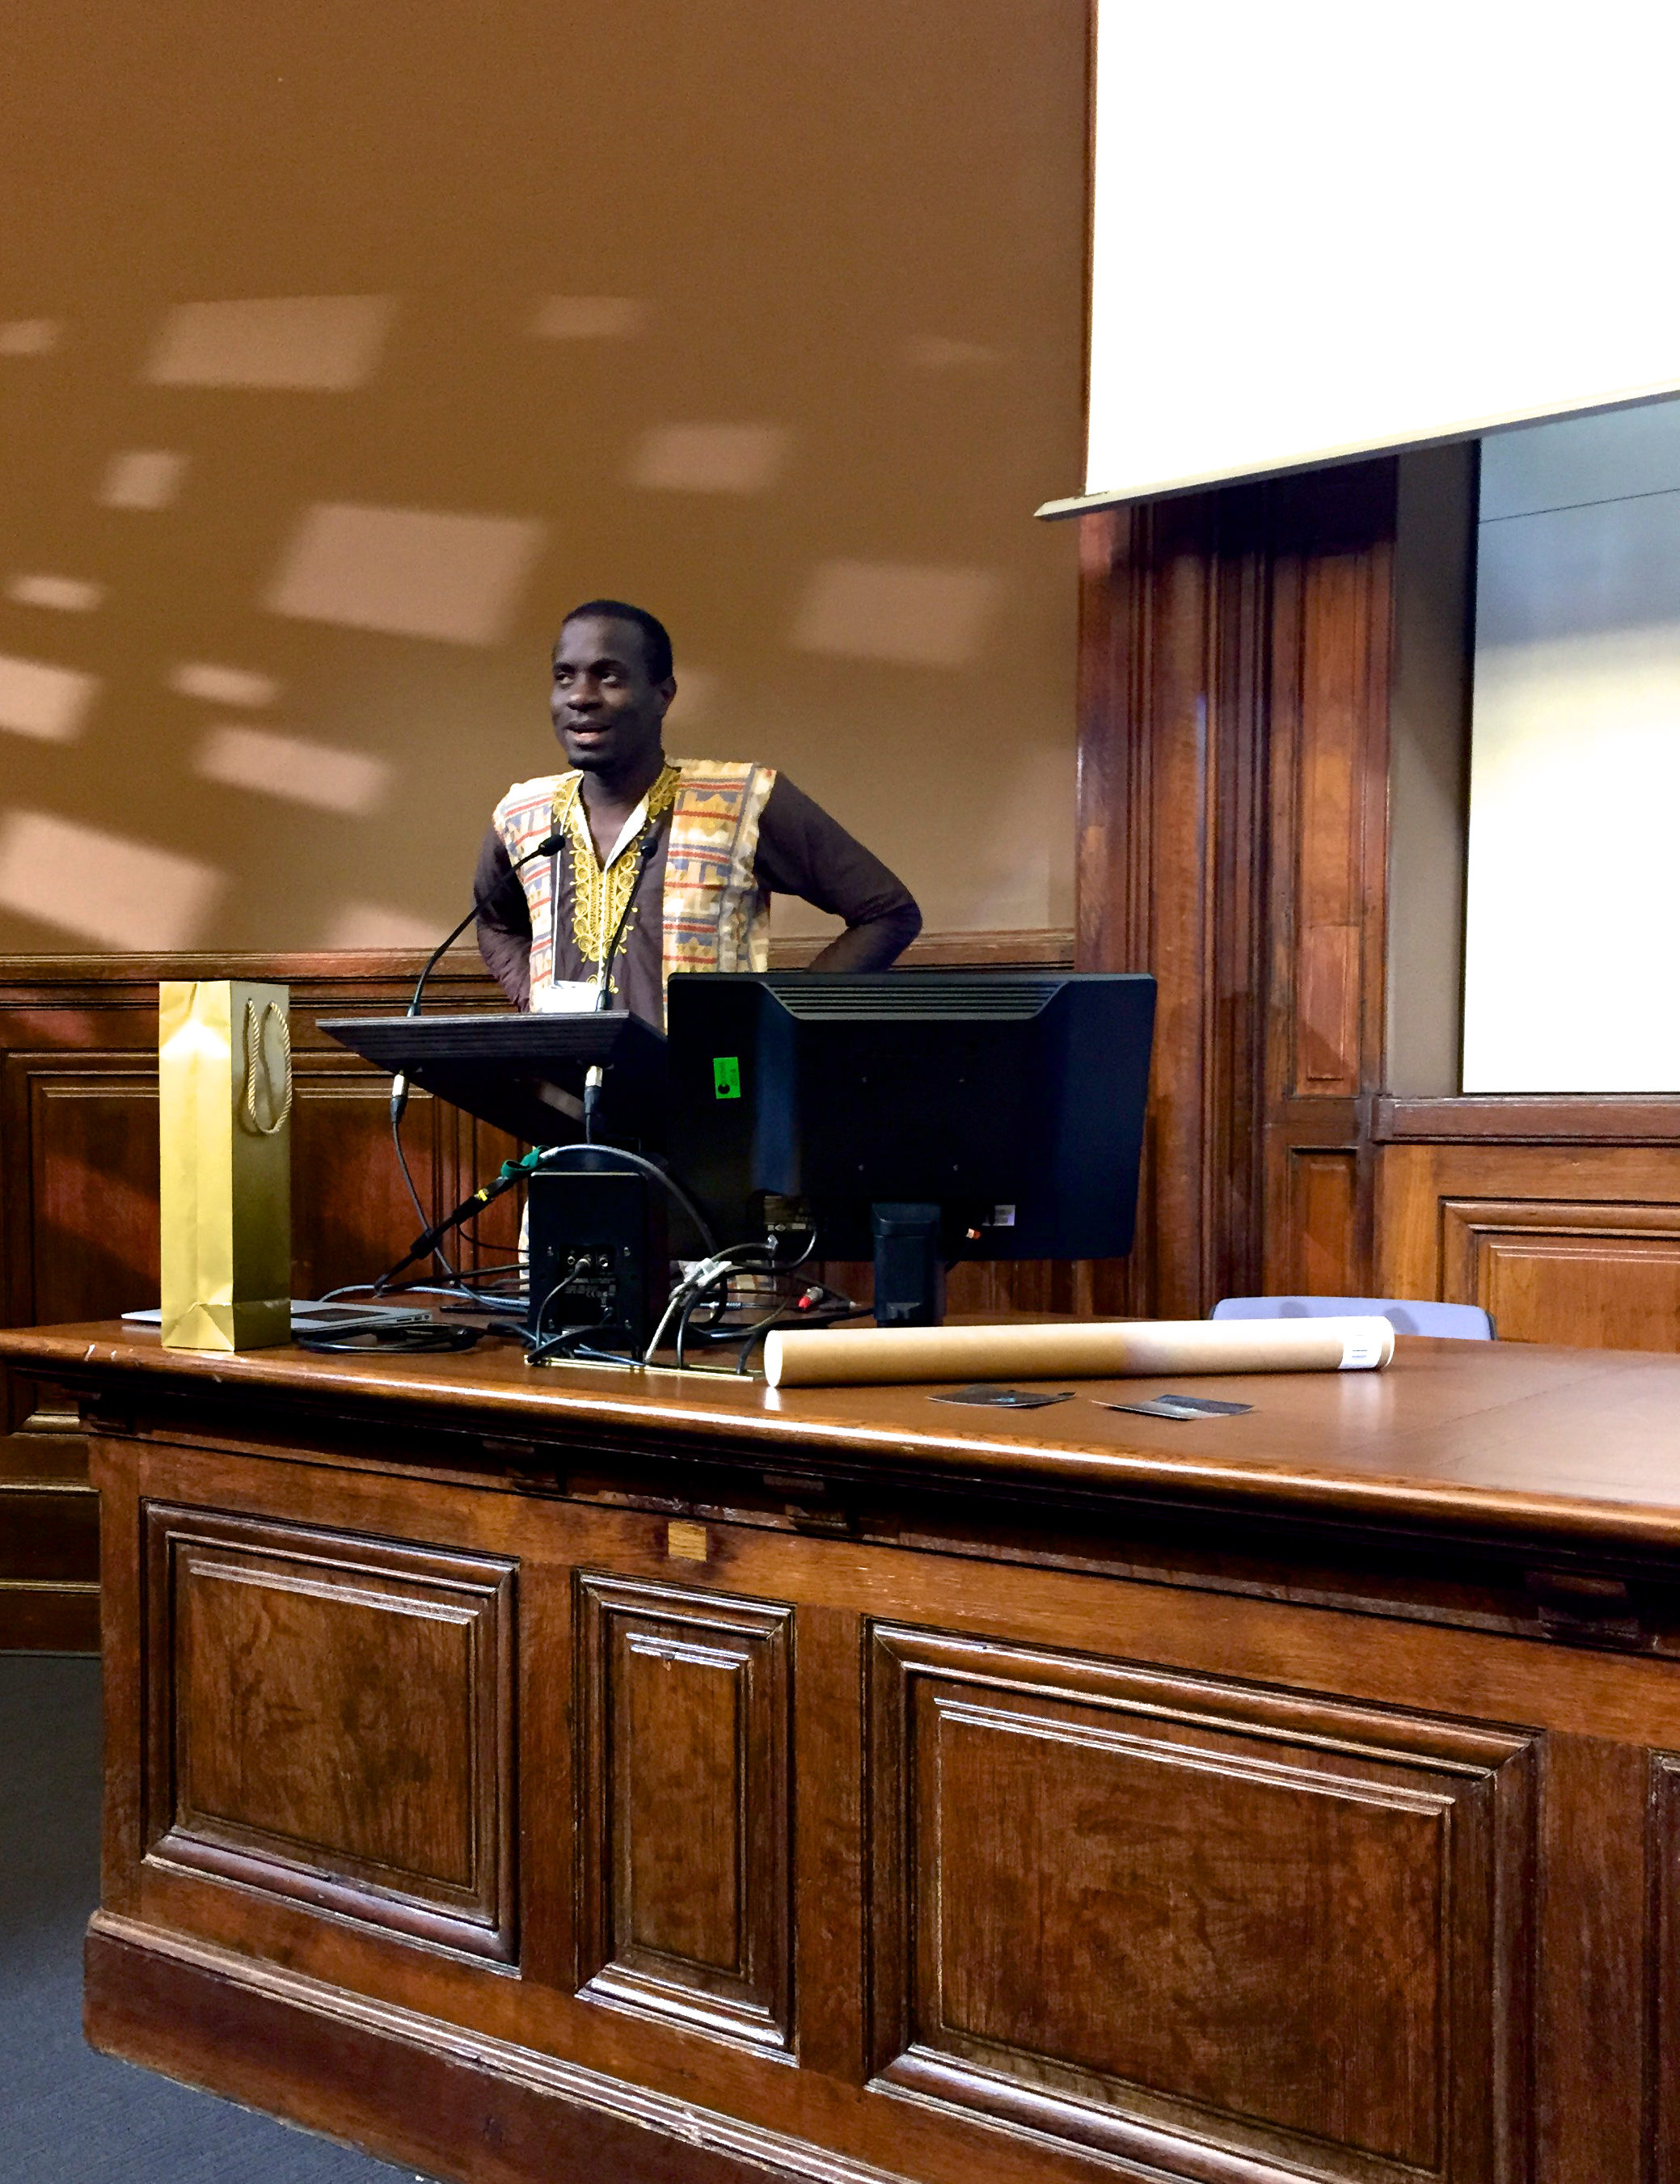 Sage Scholar Femi Longe, from Open Living Labs, is shown speaking at the Paris Sage Assembly, April 18, 2015.